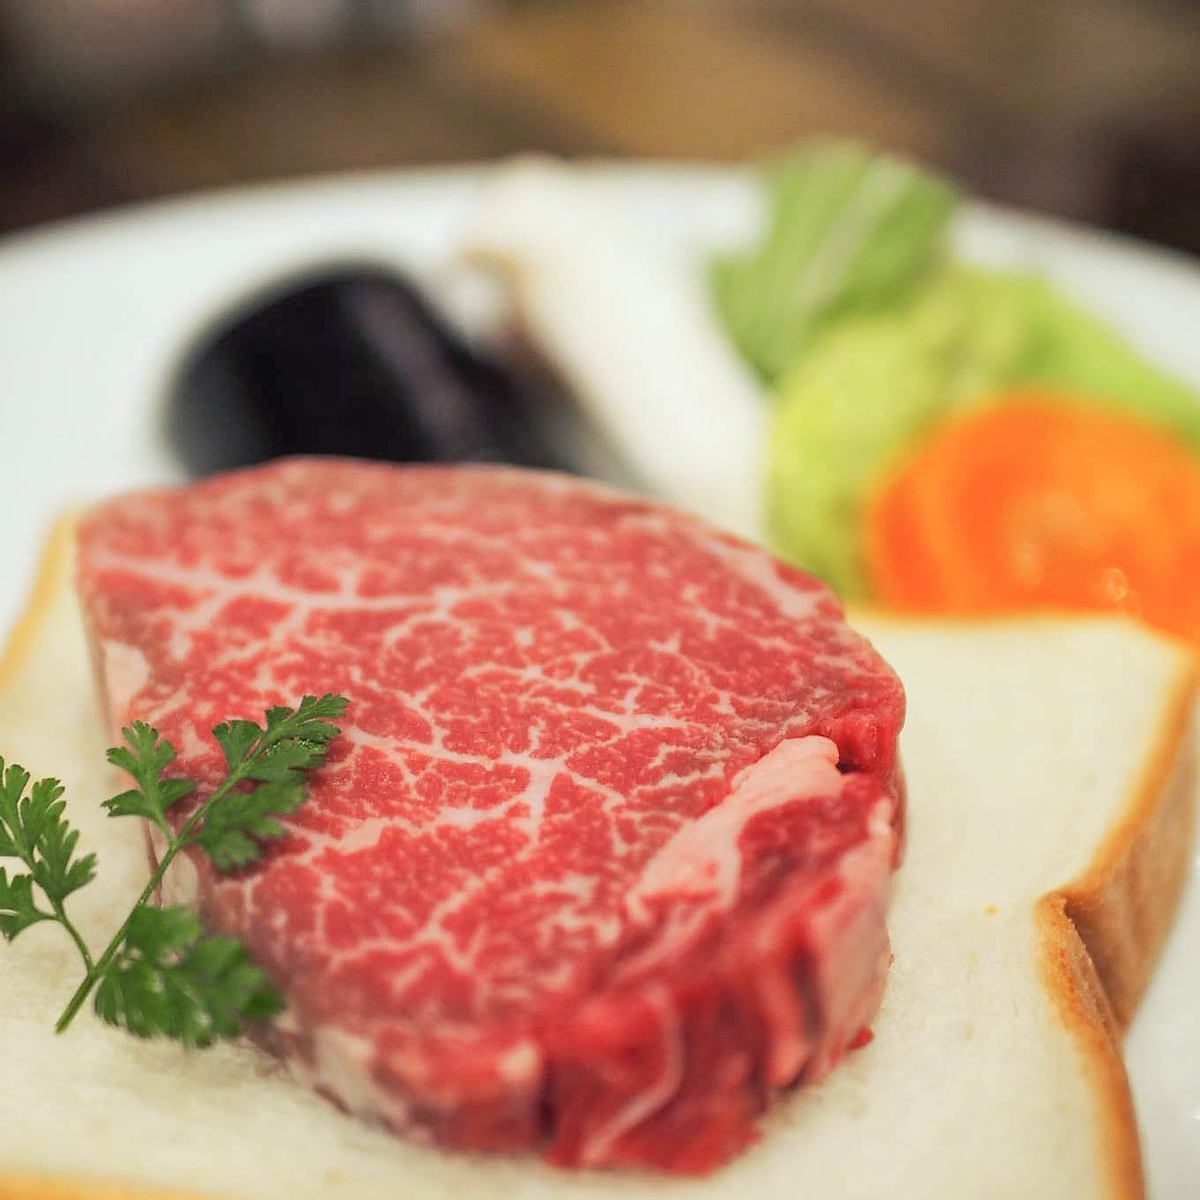 Pursue uncompromising meat quality and enjoy the finest fillet sirloin!